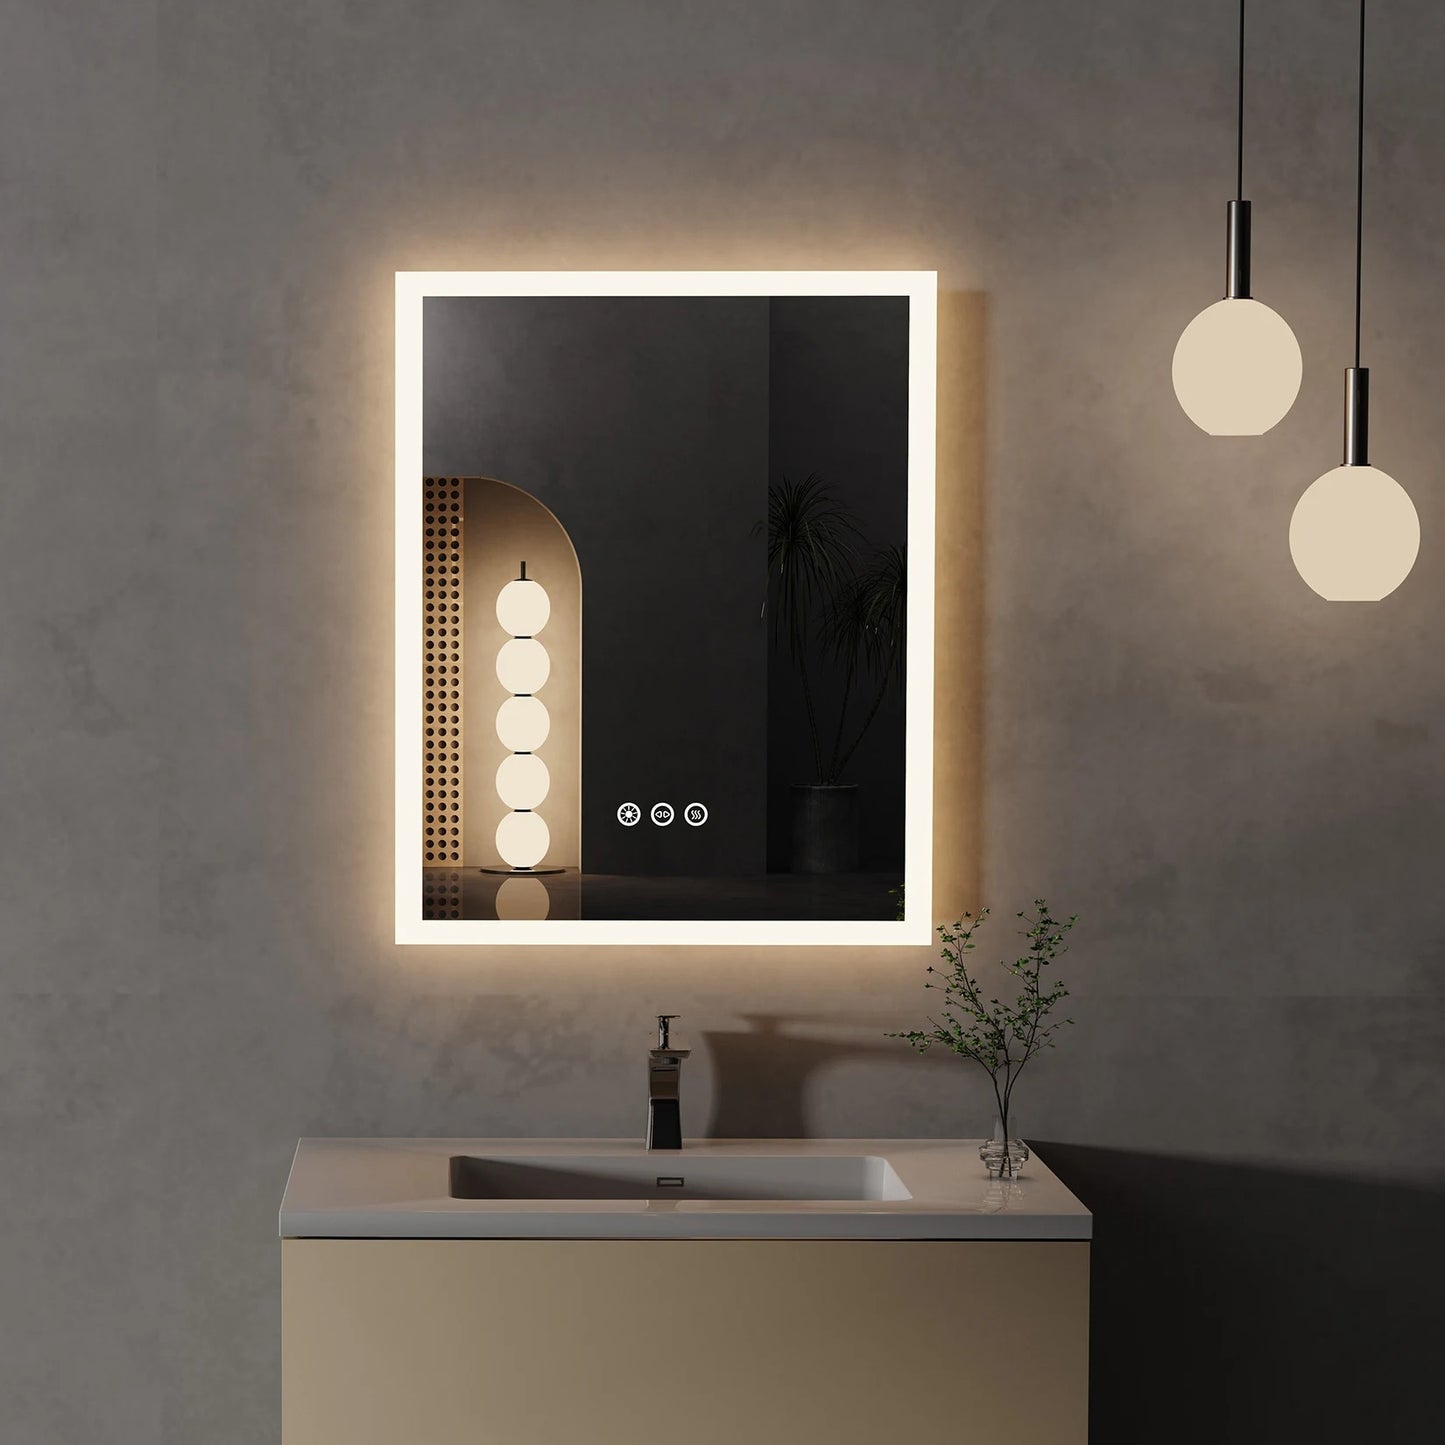 16x20 inch LED Lighted Bathroom Mirror with Anti-Fog, Wall Mounted Vanity Mirror with Smart Touch Button, Memory Function